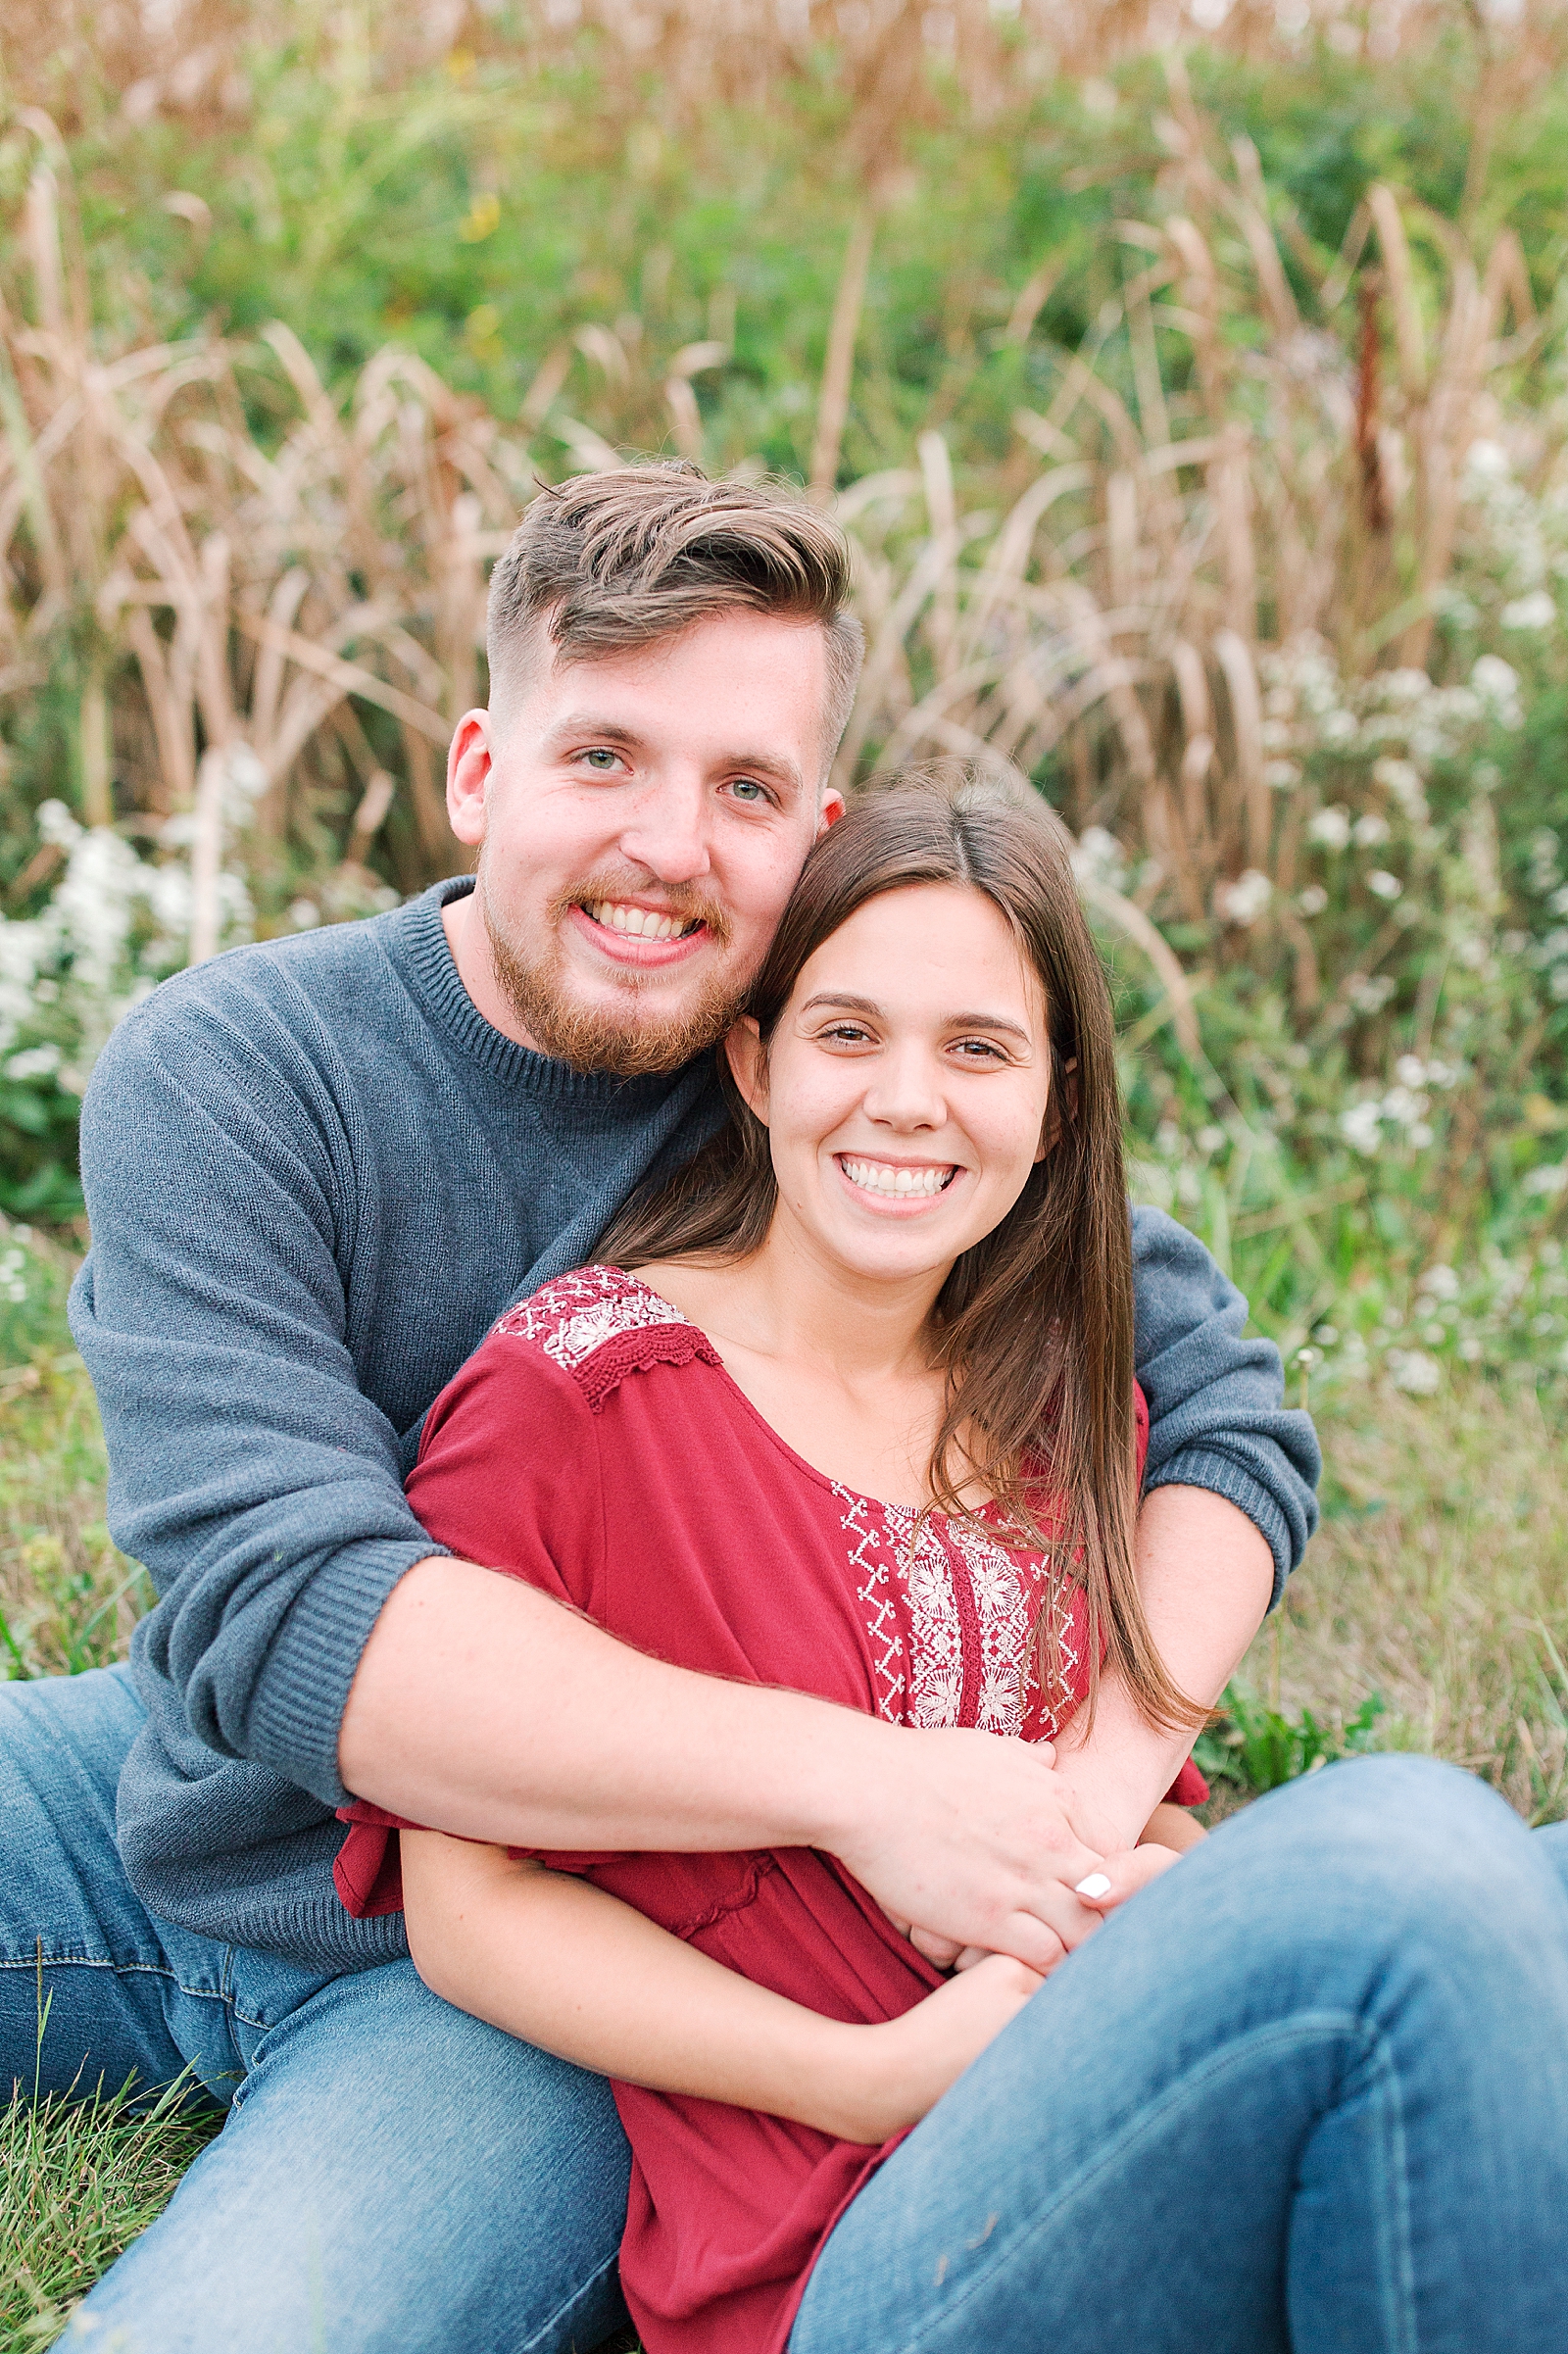  North Carolina Mountain Engagement Session Couple Sitting in Grass Smiling at Camera Photo